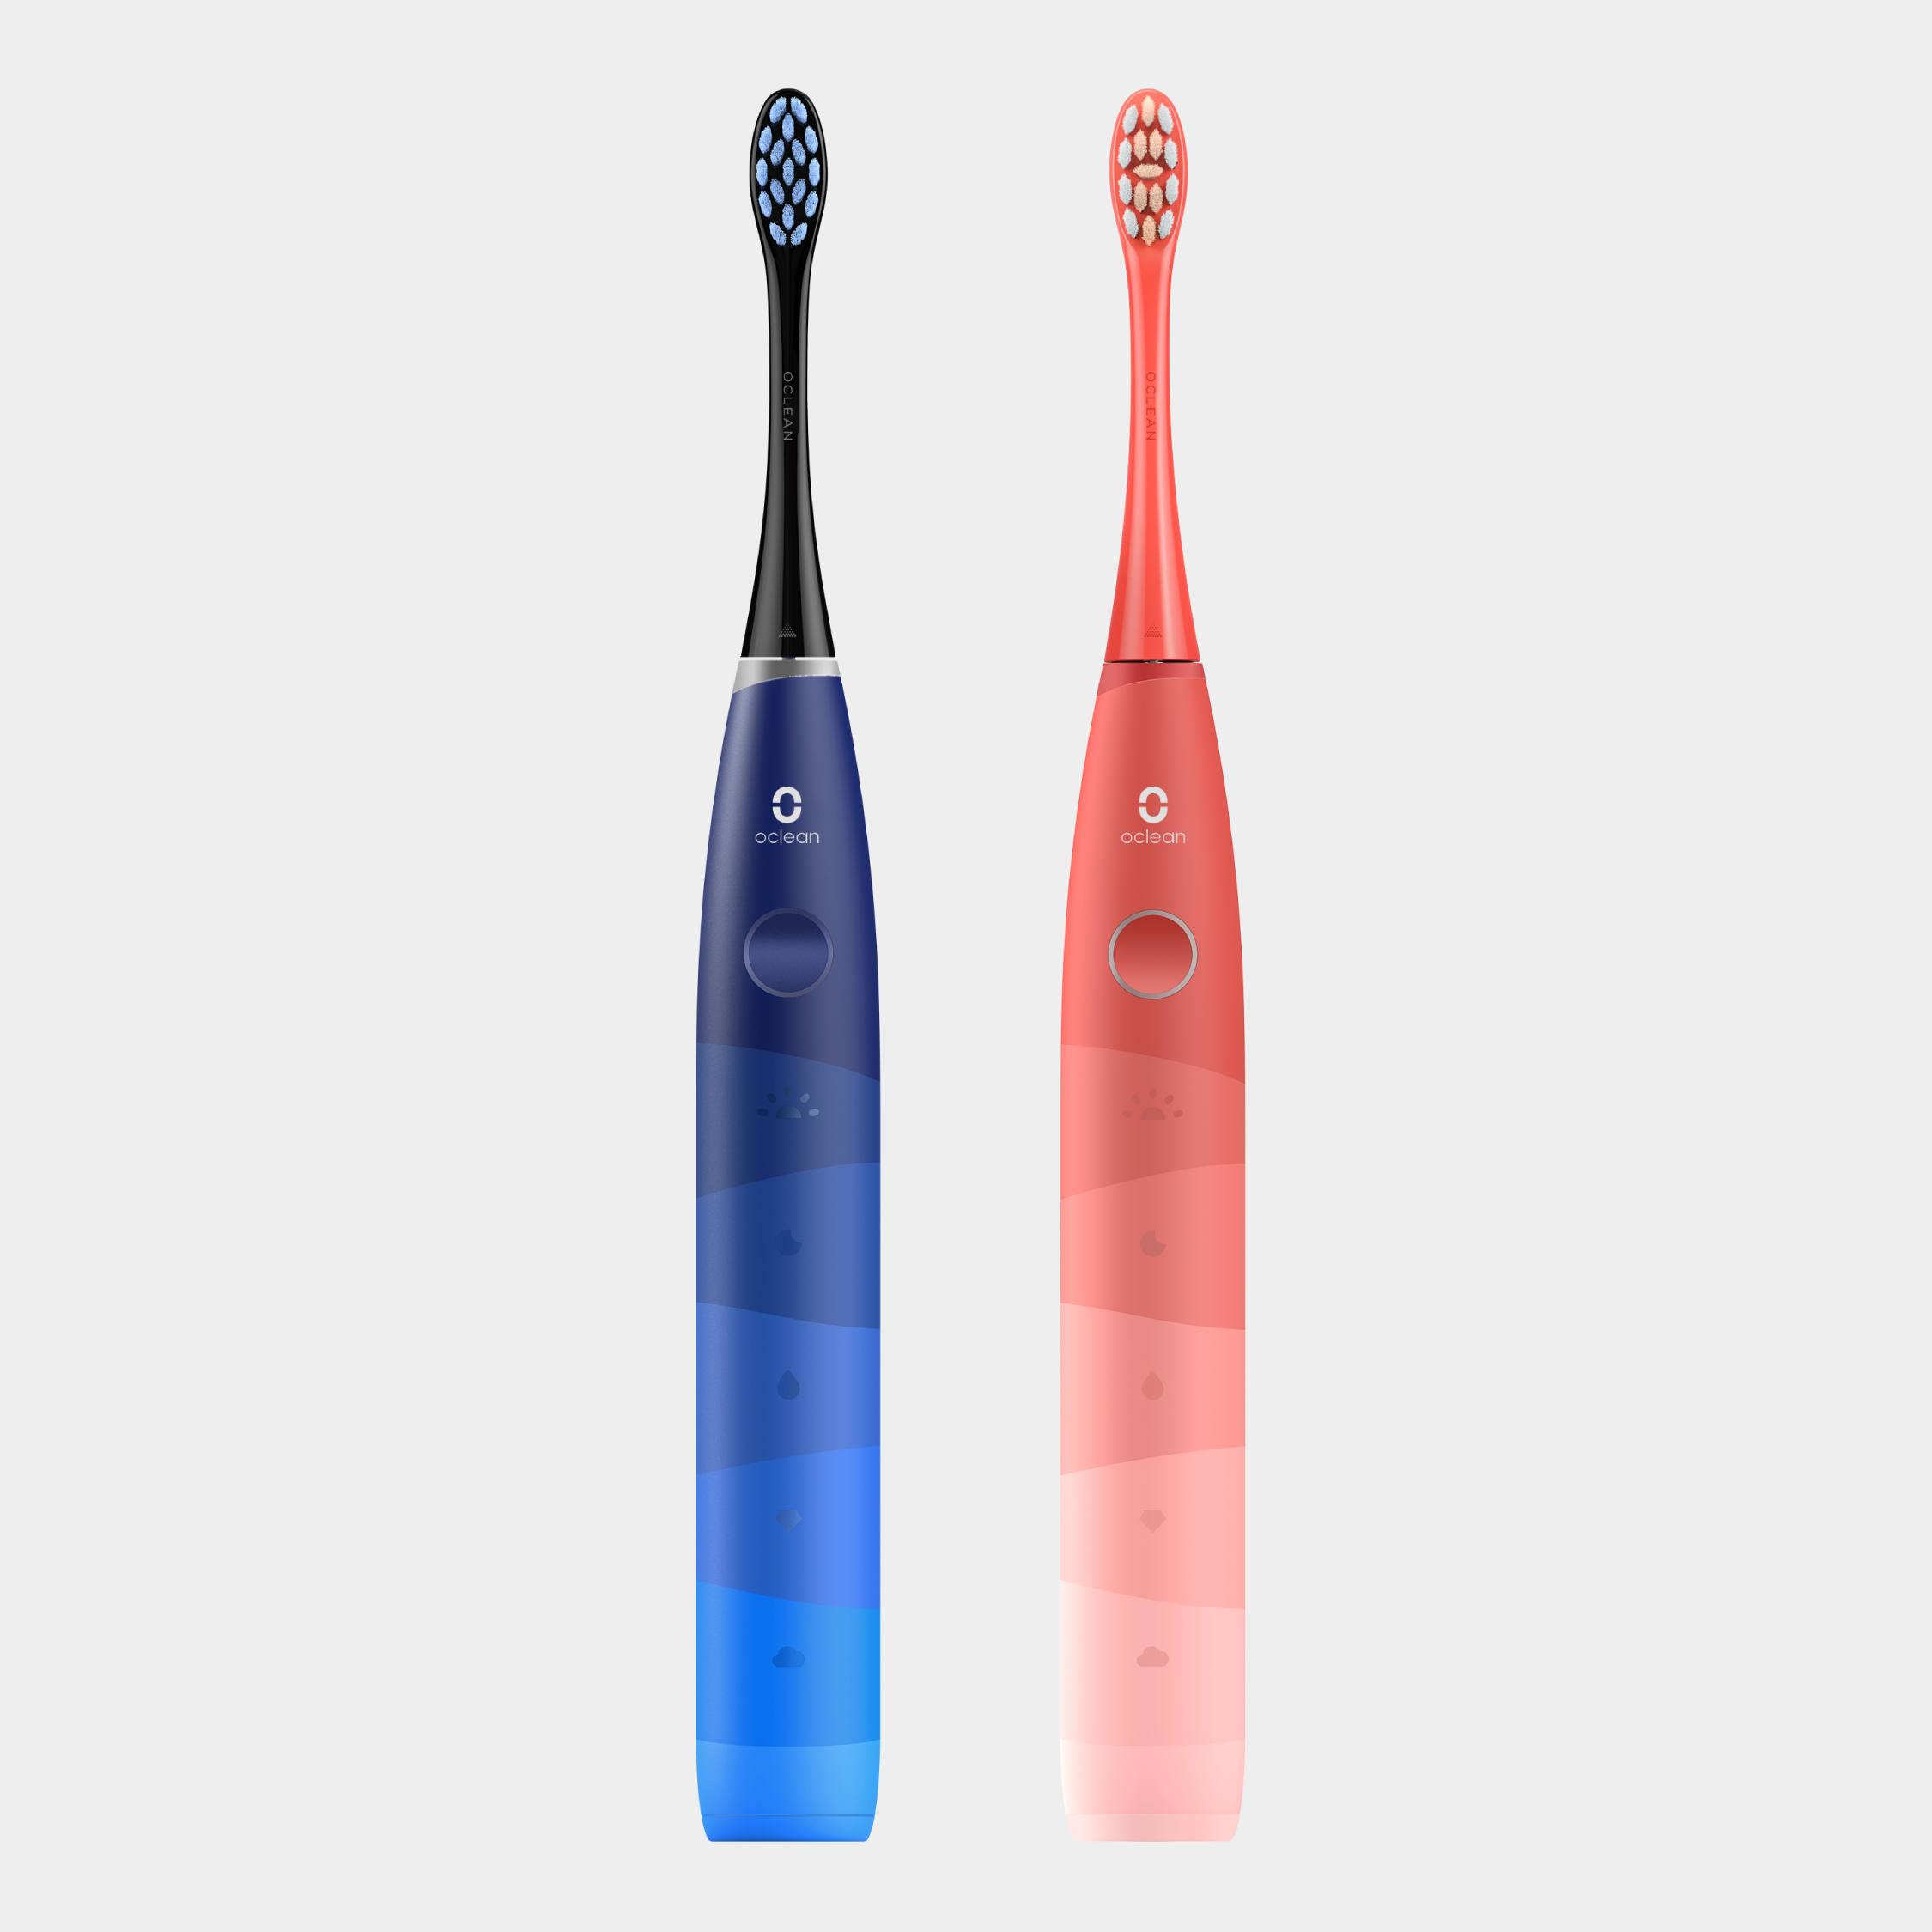 Oclean Find Duo Set Sonic Electric Toothbrush - Oclean Official Store